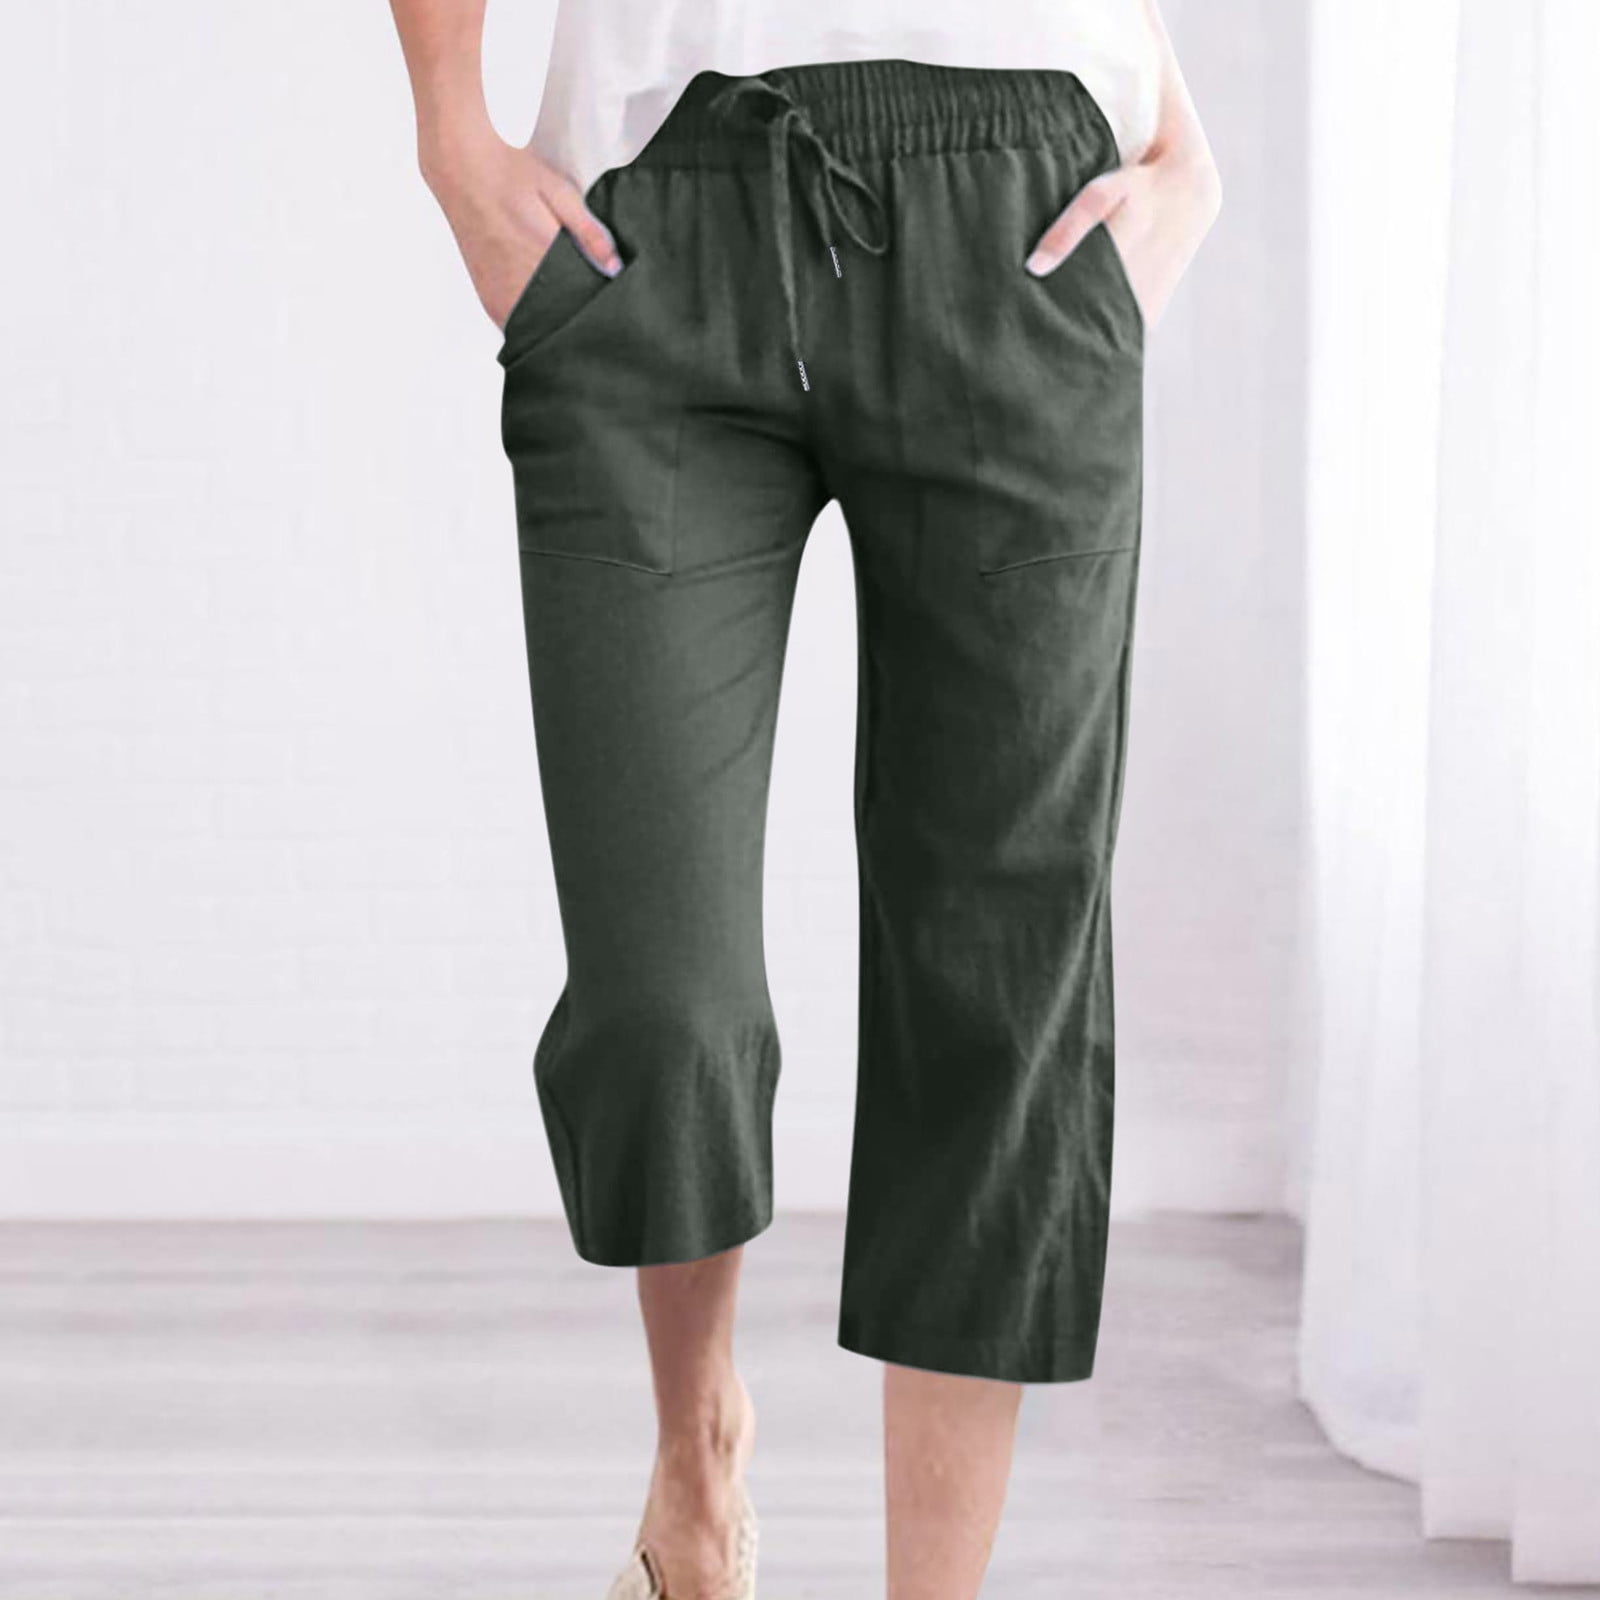 Jyeity Teacher Gifts, Solid Color Elastic Loose Pants Straight Wide Leg  Trousers With Pocket Shapermint Leggings High Waist Green Size XL(US:10) 